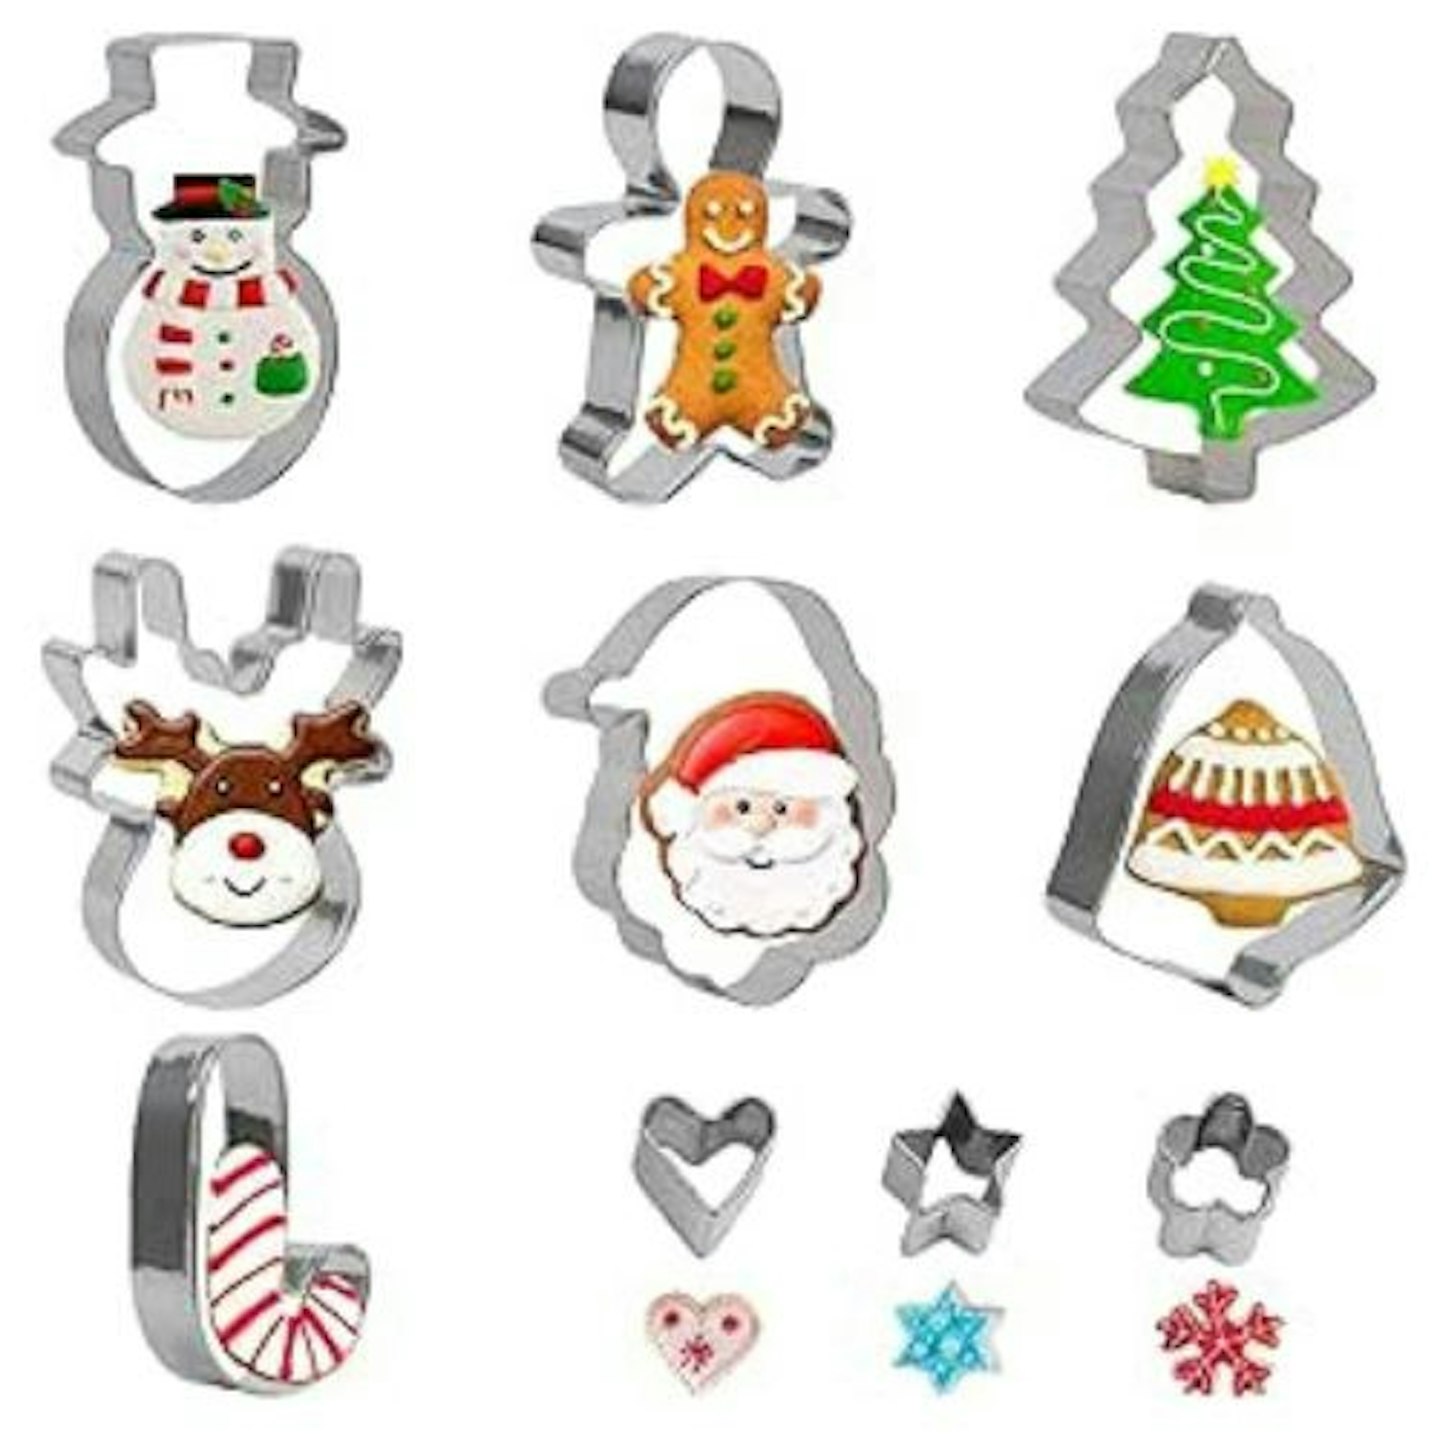 SULOLI Christmas Cookie Cutter Set,10 Pack